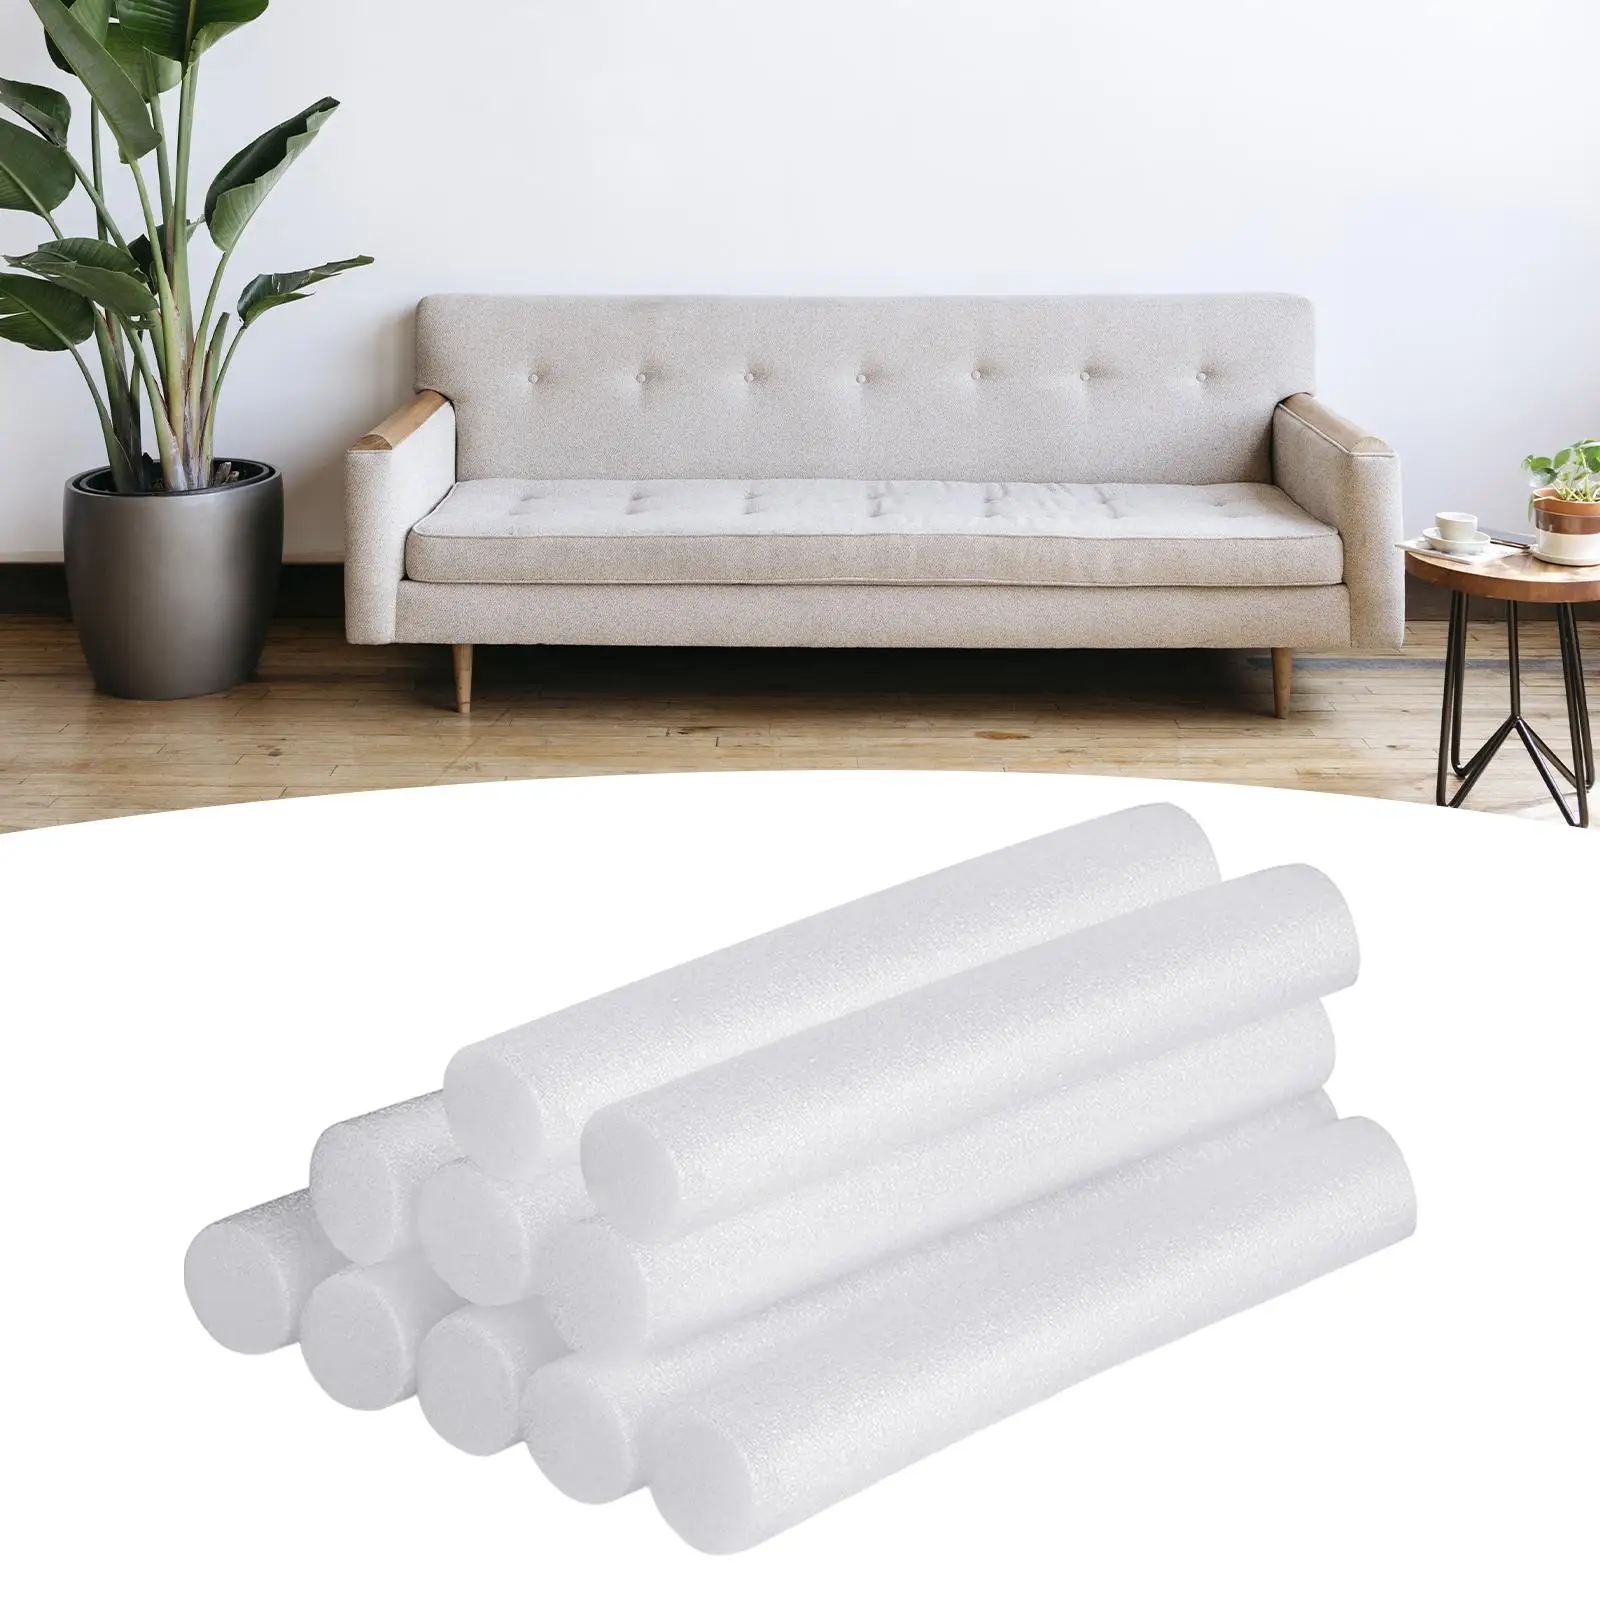 30x Foamed Foam Sofa Slipcovers Sofa Slipcovers Tuck Grips for Stretch Couch